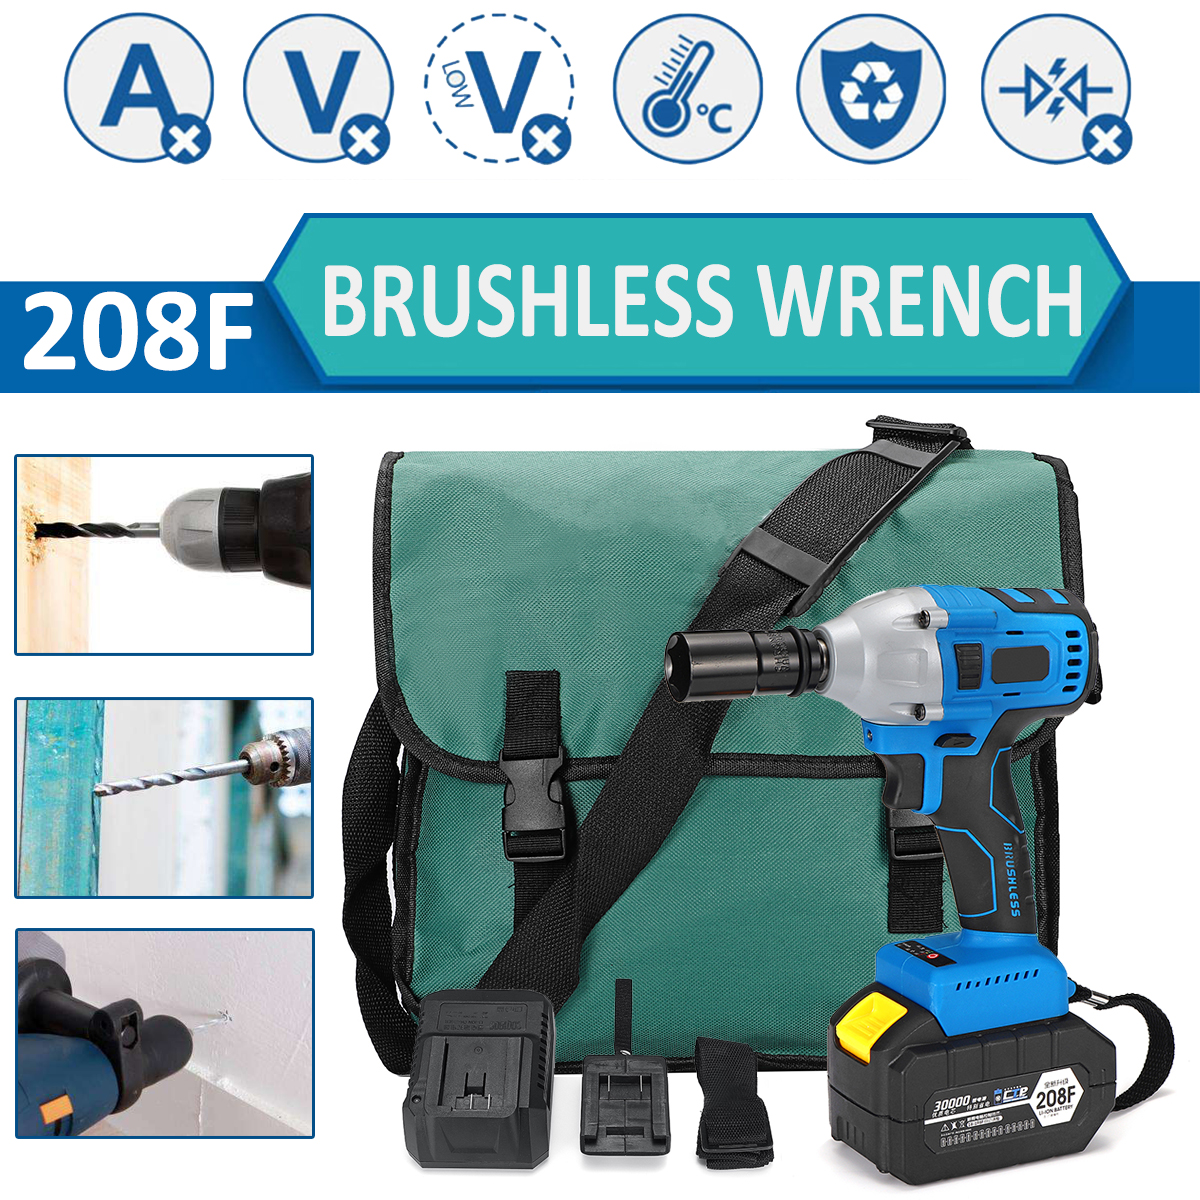 Electric-Screwdriver-Brushless-Cordless-Drill-Wireless-Electric-Wrench-Impact-Power-Tools-With-2-Bat-1380494-6